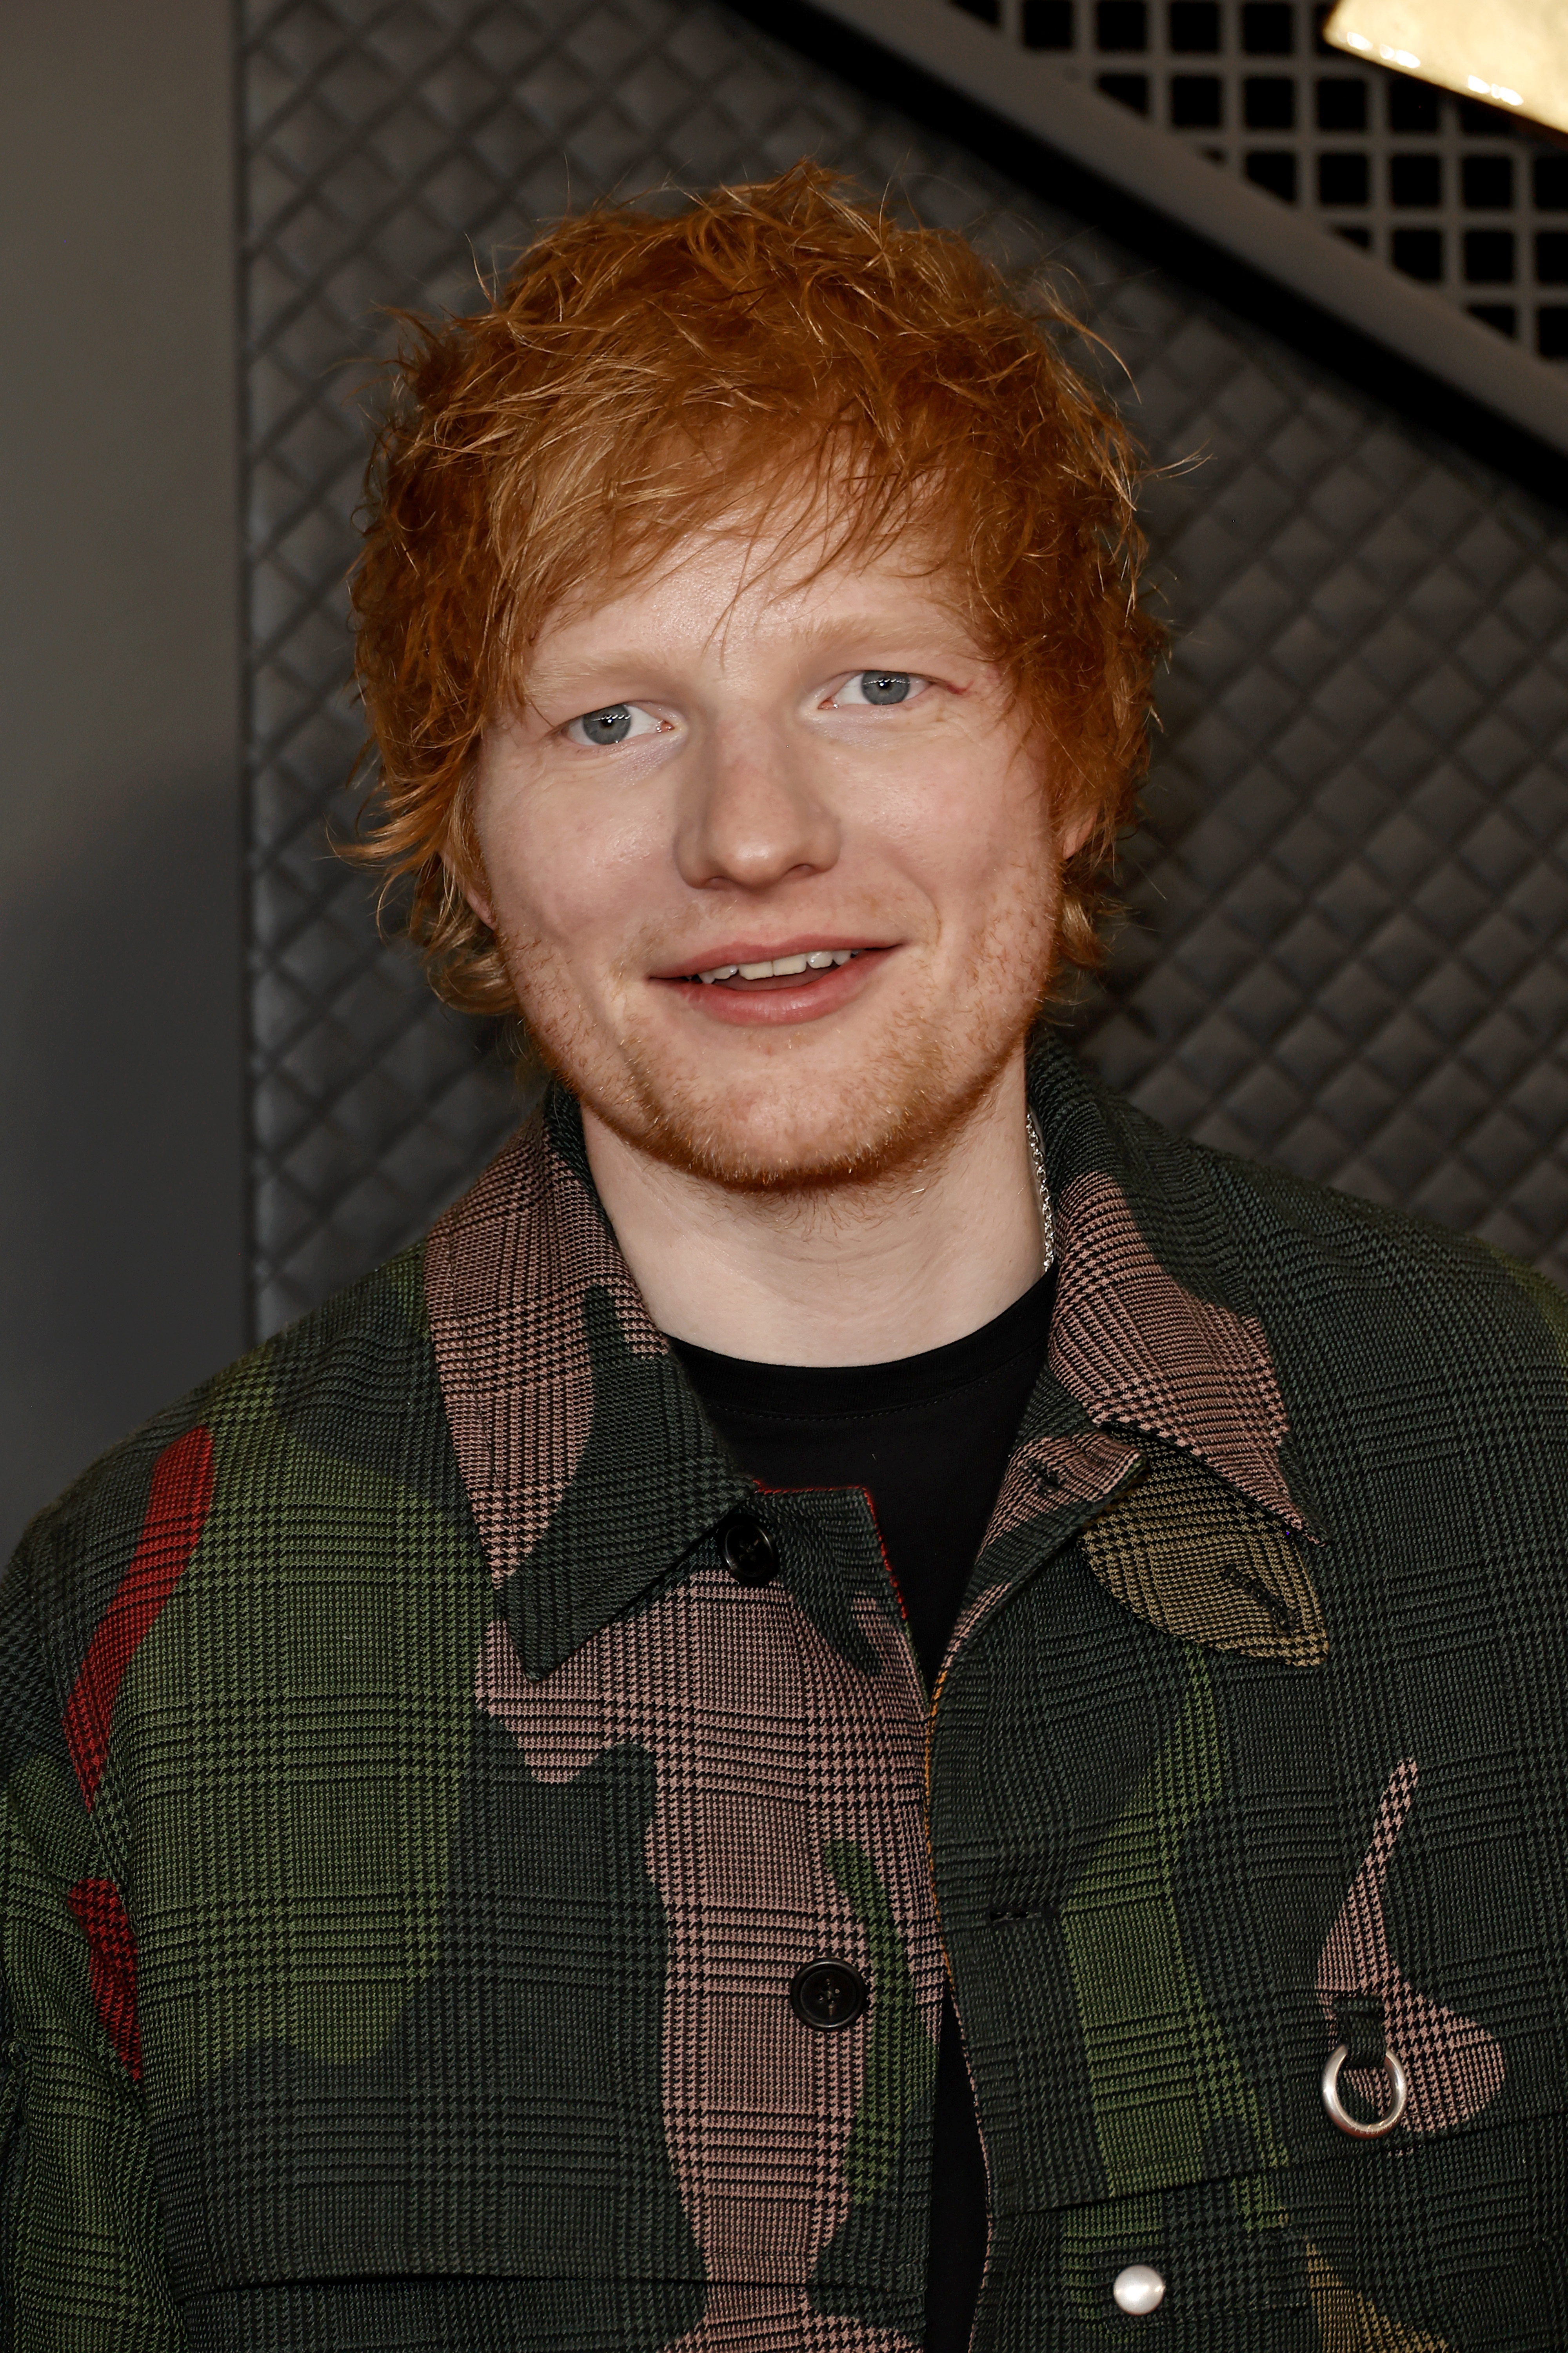 Ed Sheeran smiles, wearing a patterned jacket over a black top. He stands in front of a quilted background